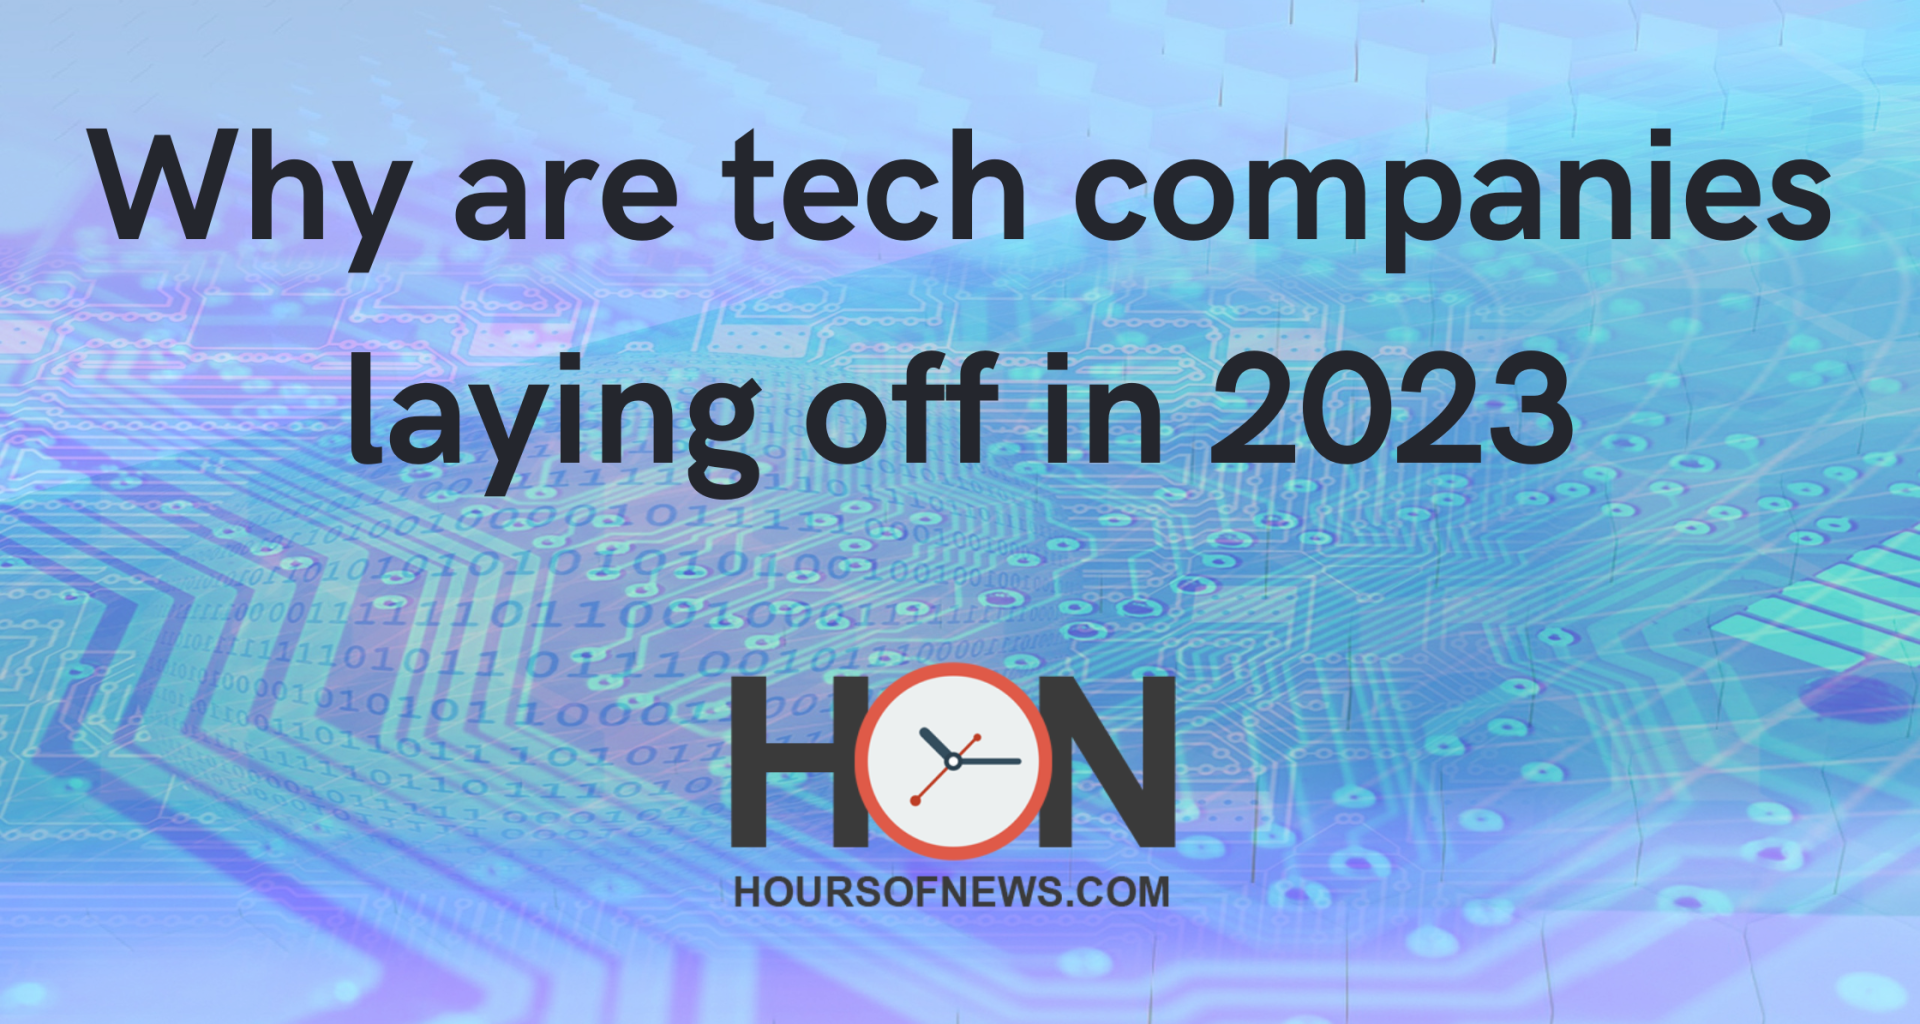 Why are tech companies laying off in 2023